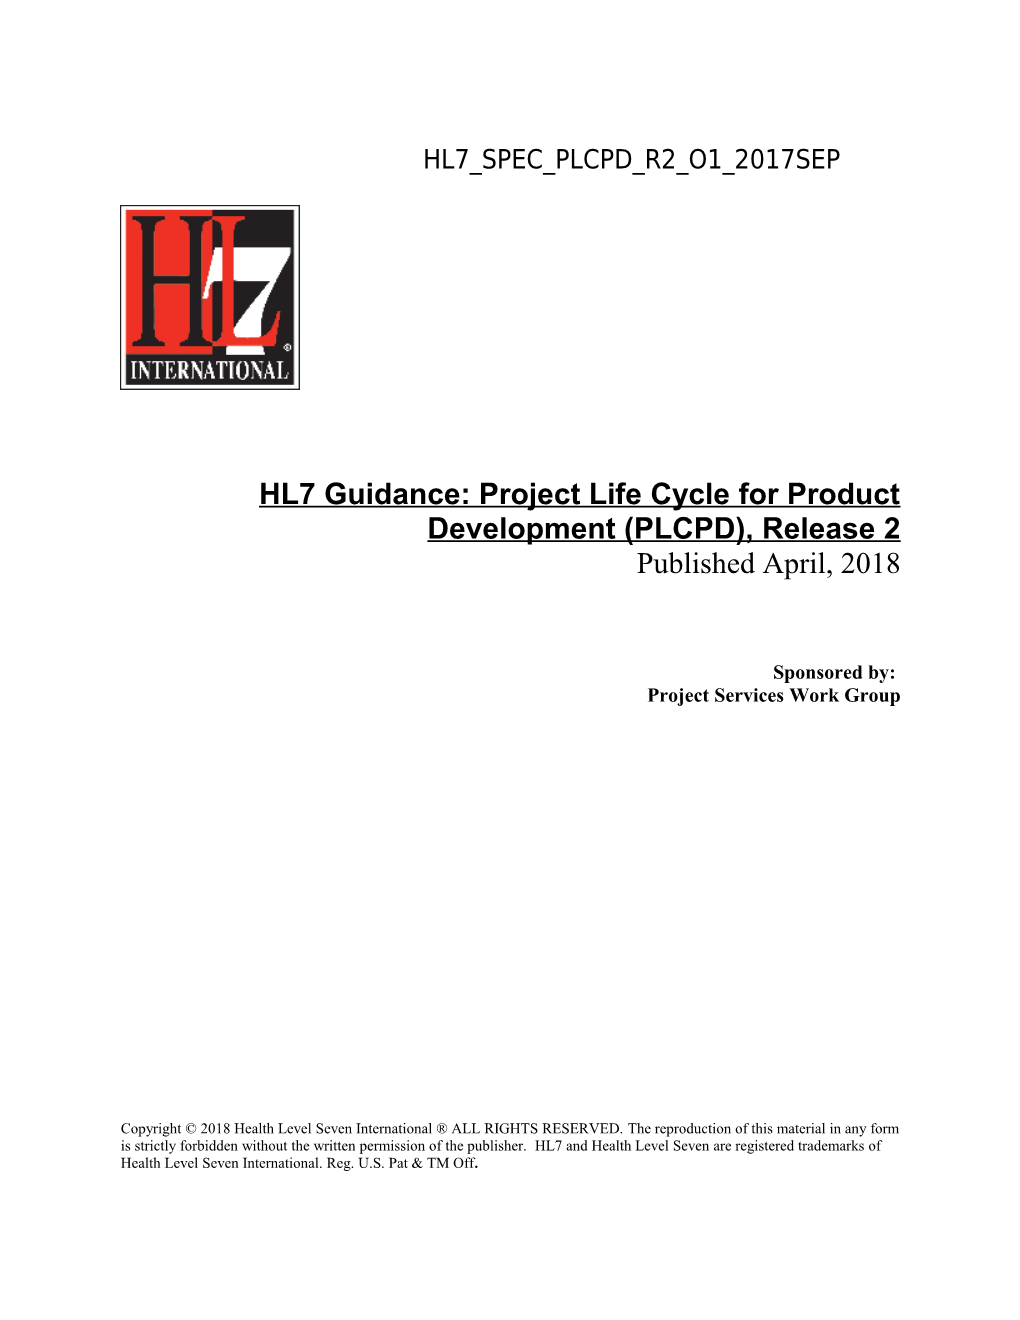 HL7 Guidance: Project Life Cycle for Product Development (PLCPD), Release 2